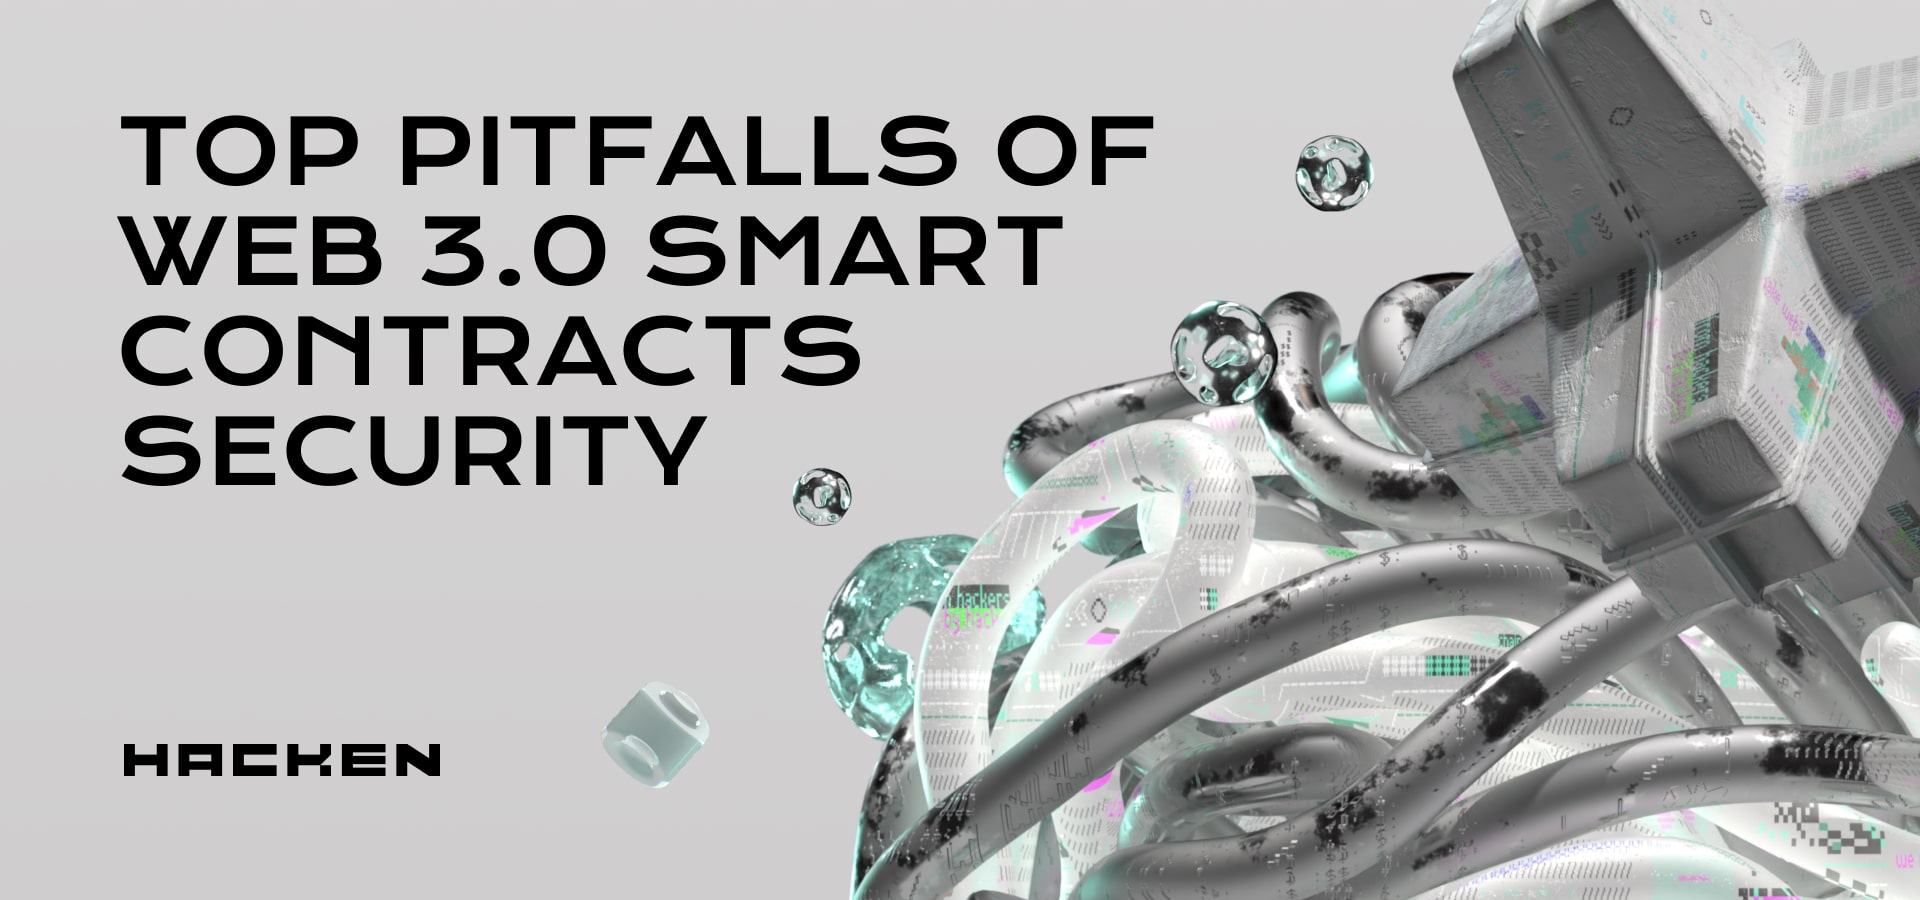 Top pitfalls of Web 3.0 Smart Contracts Security